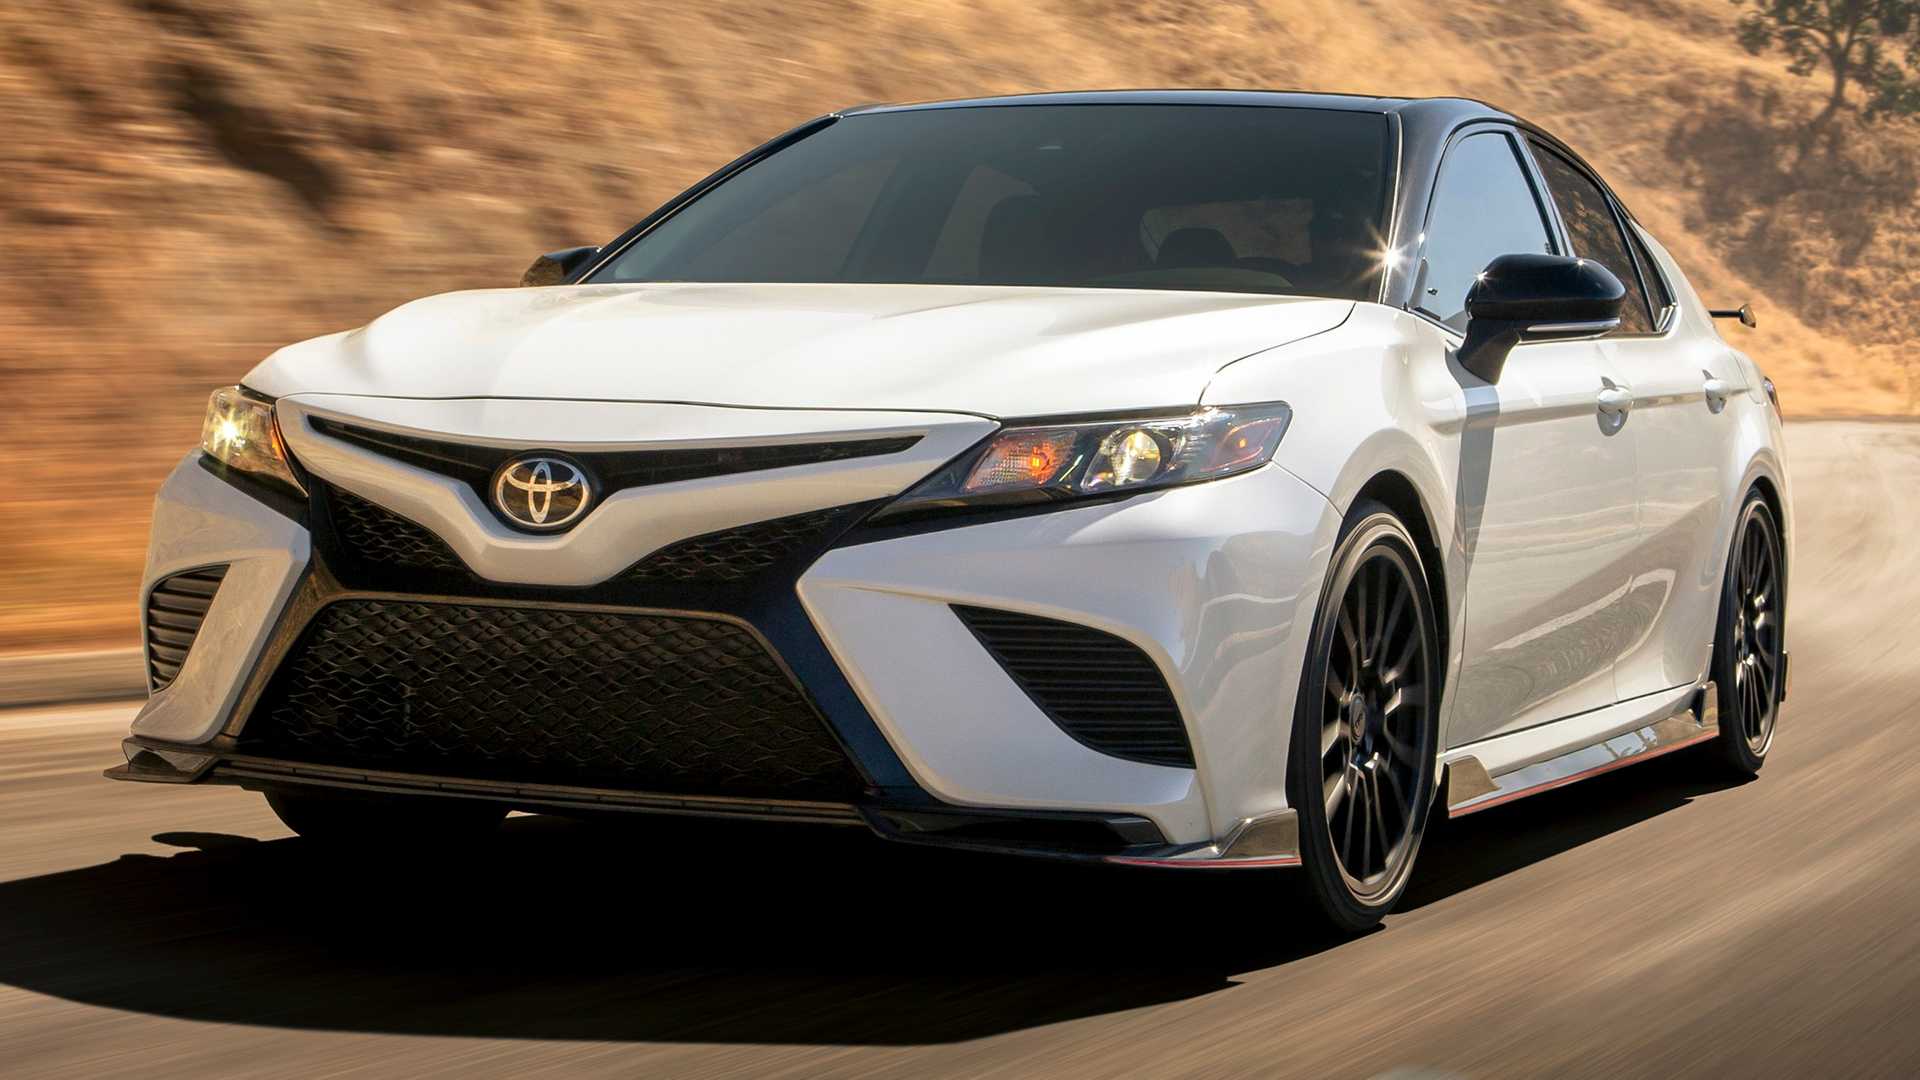 The Toyota Camry 2020 TRD